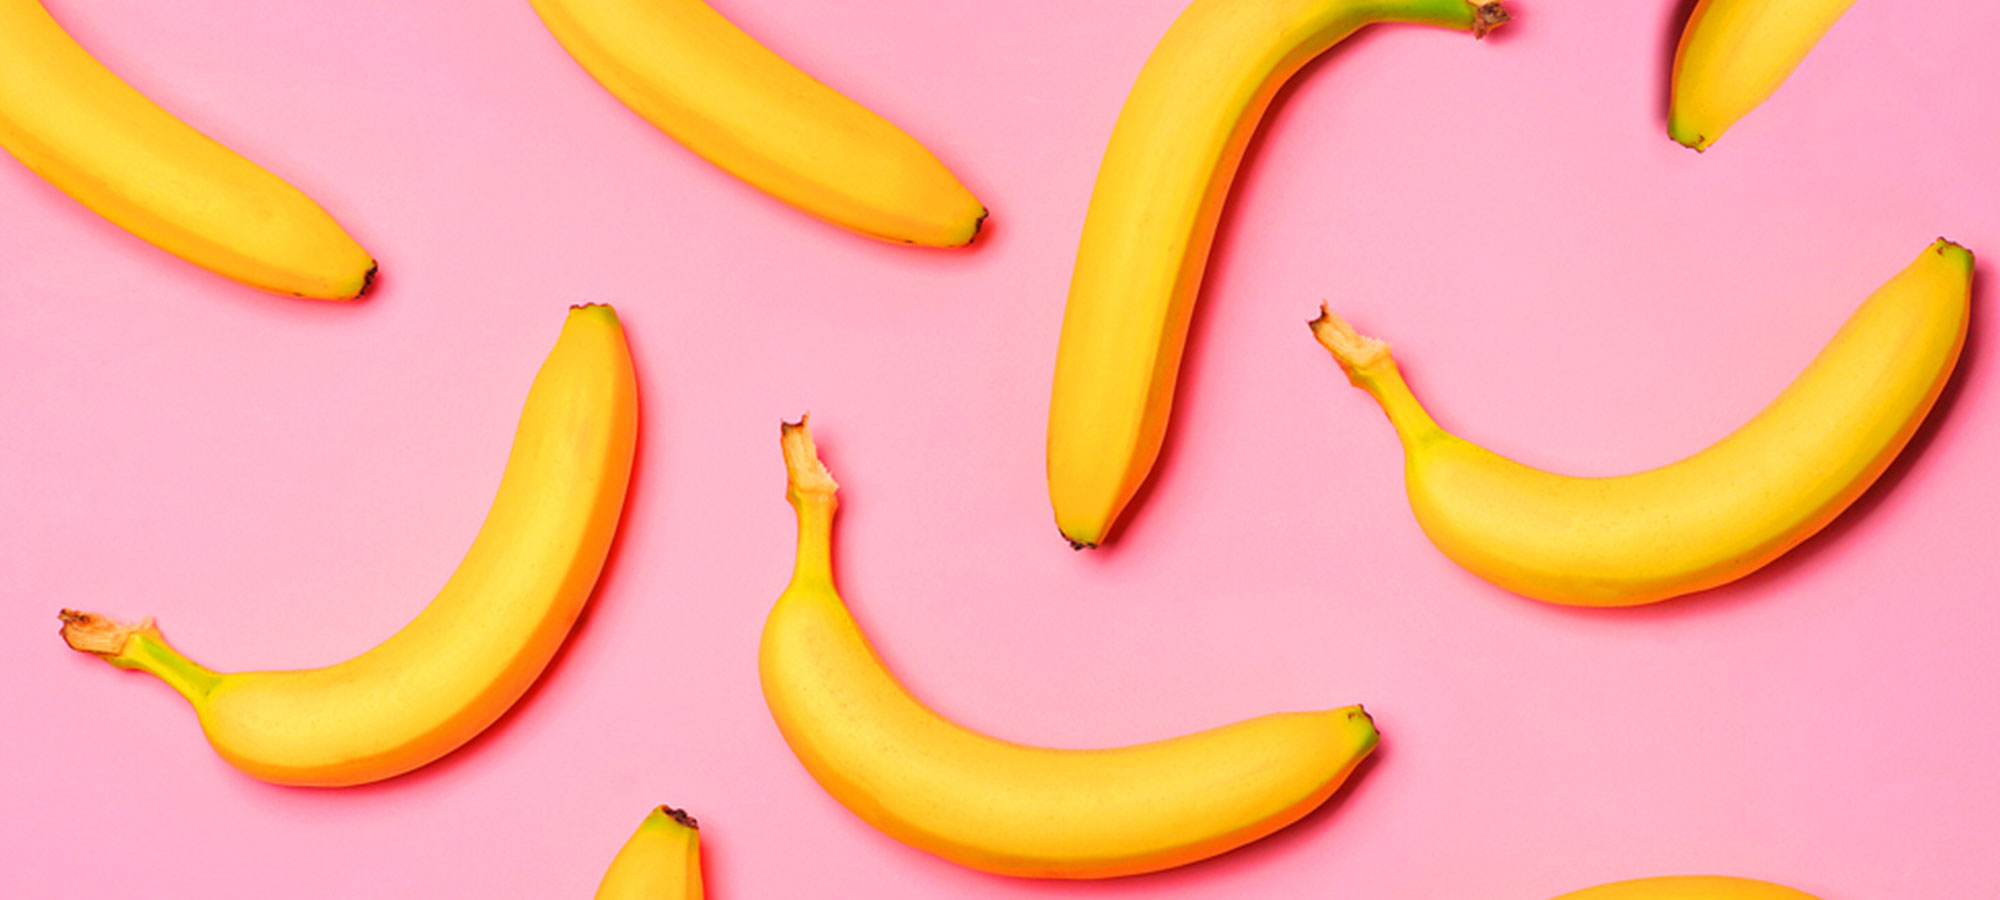 6 Reasons, Bananas are a great health fix!